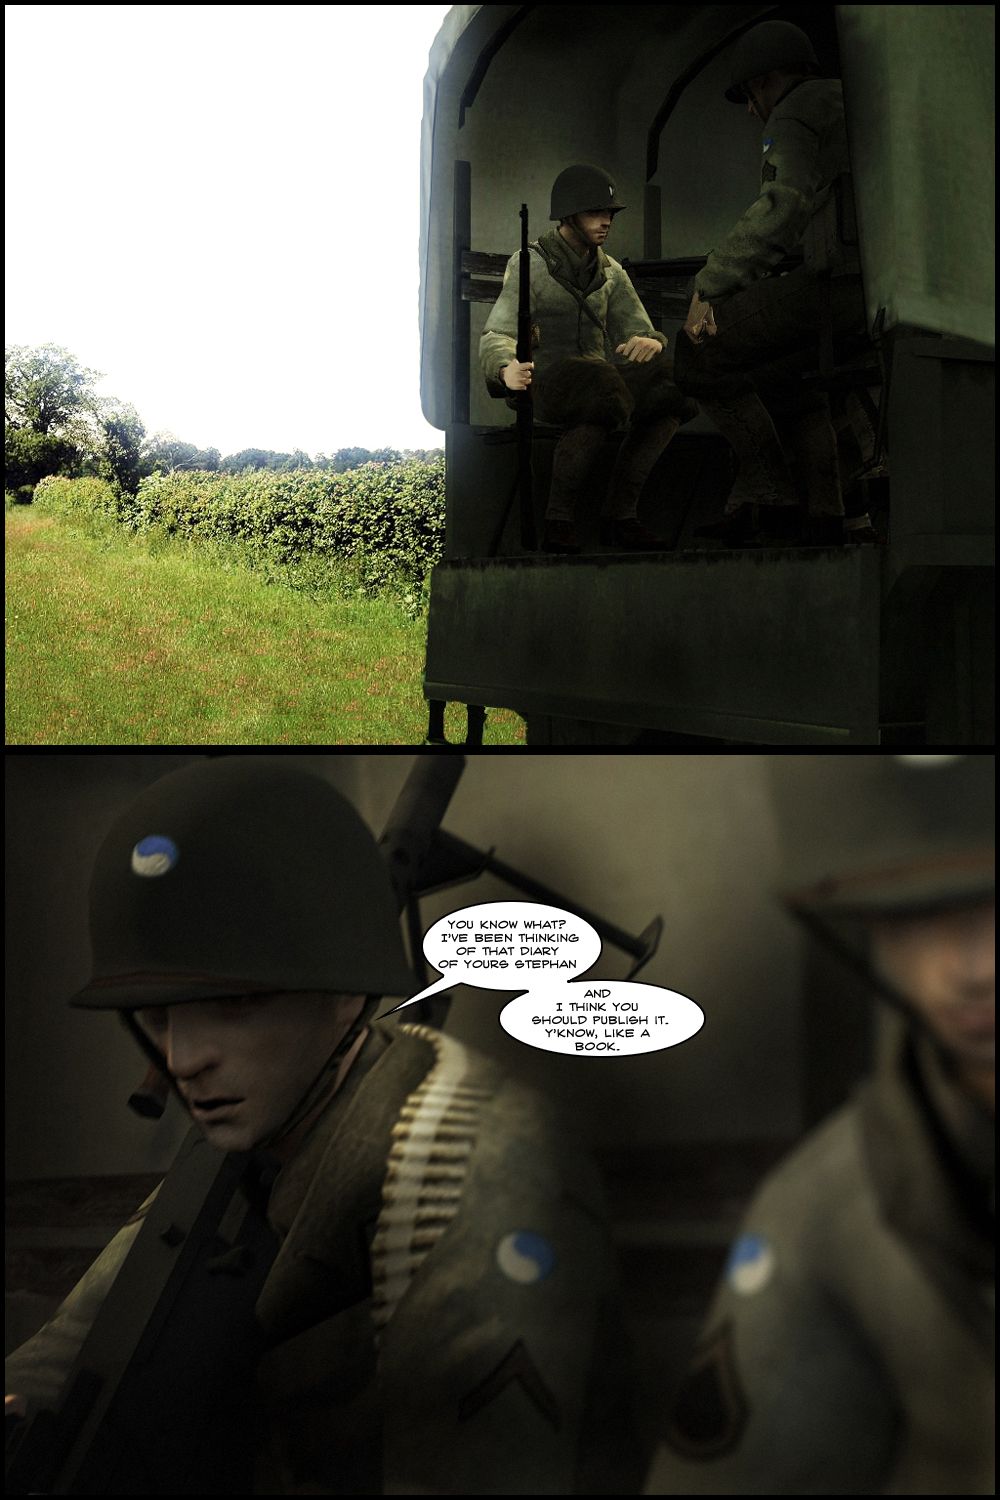 As the truck drives across the fields of France, the soldiers pause a moment in peaceful quiet, then a soldier, Jack, tells Stephan he's been thinking of that diary of his and that he thinks he should publish it.